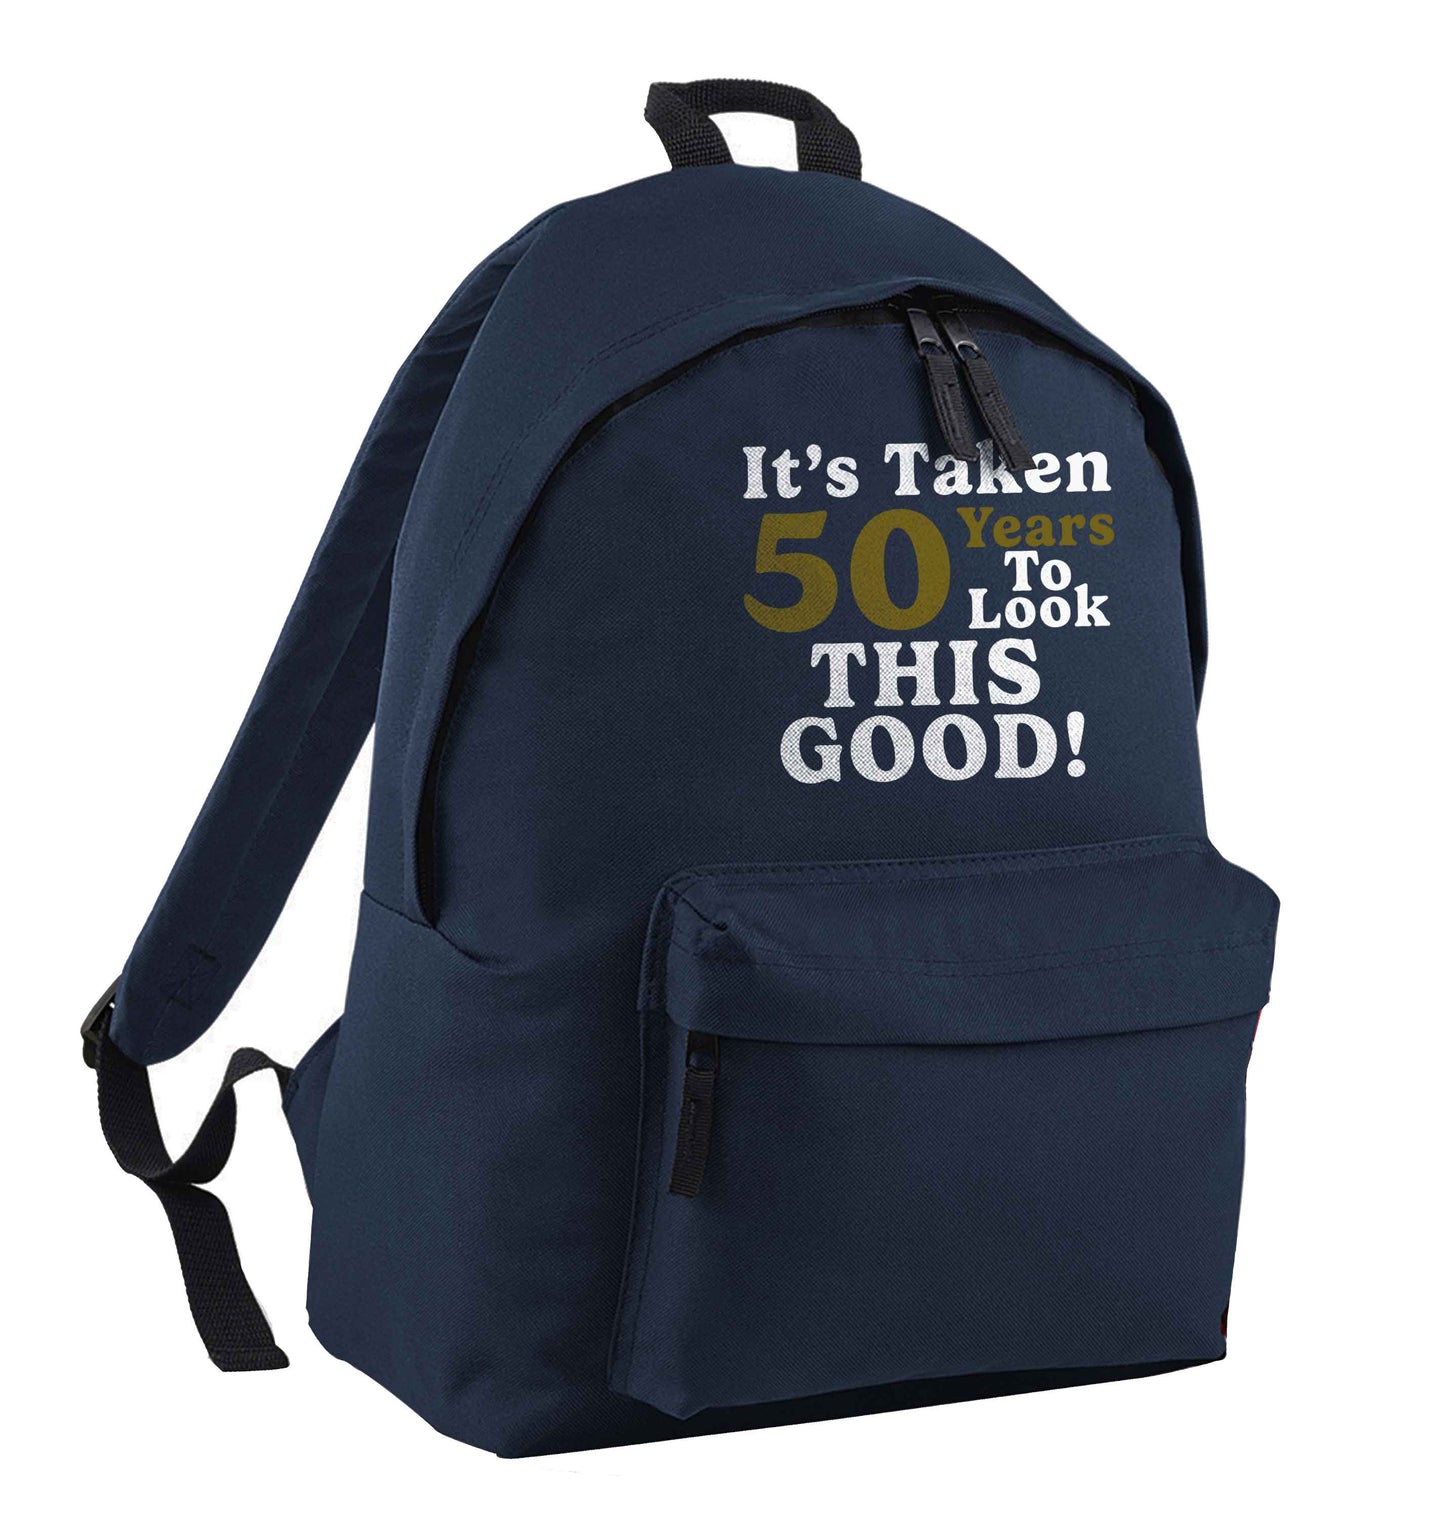 It's taken 50 years to look this good! navy adults backpack